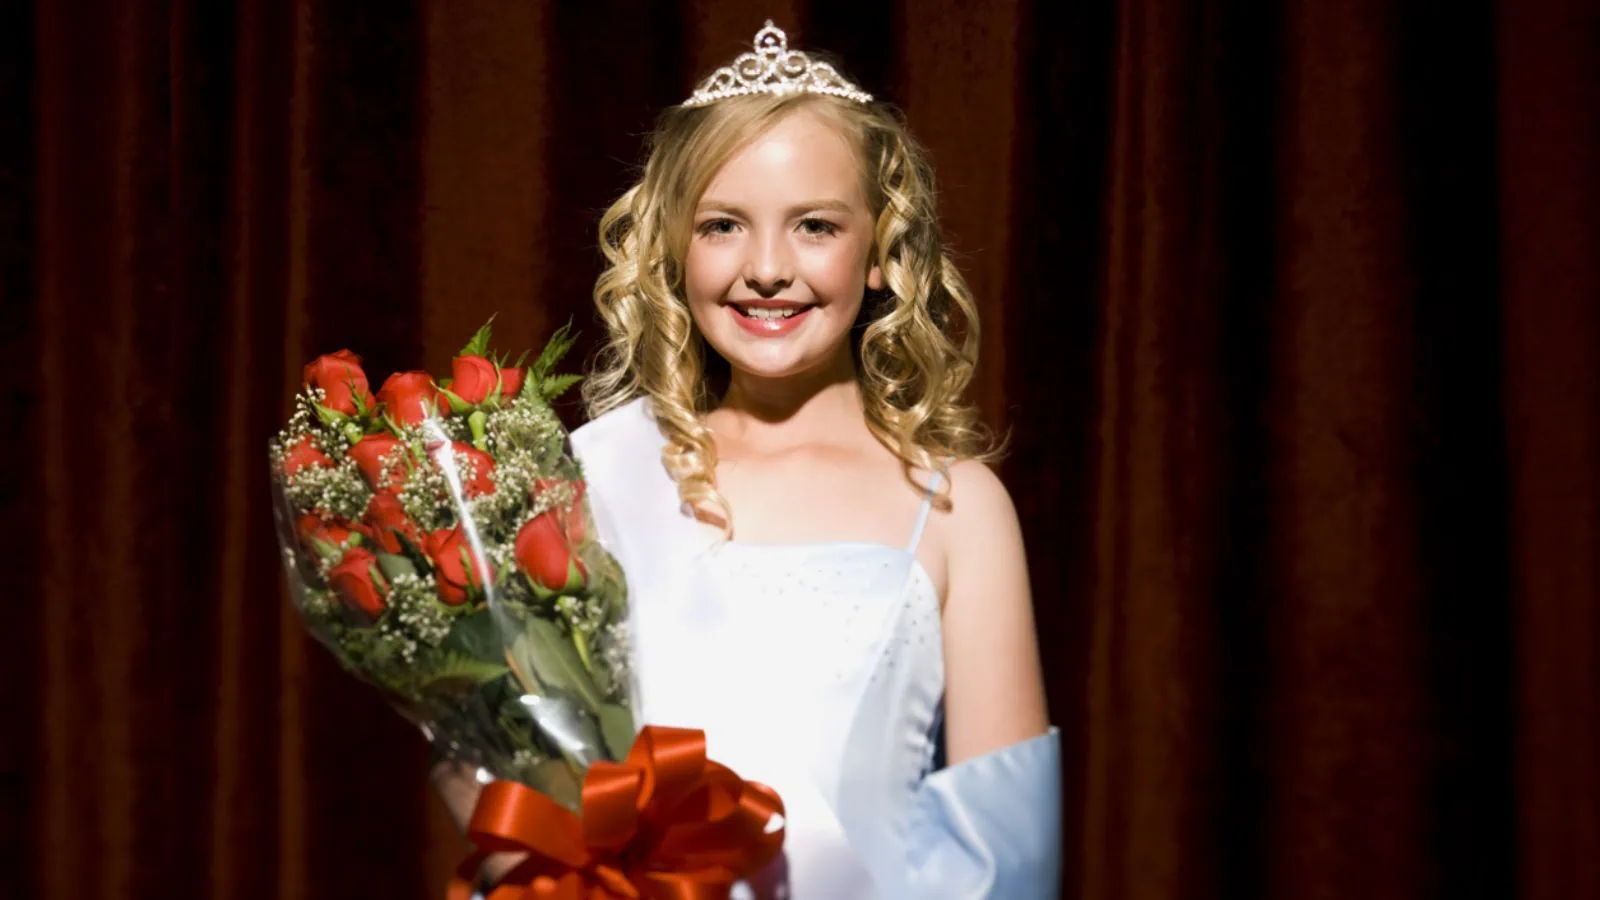 Half length of a beauty pageant winner smiling and holding roses